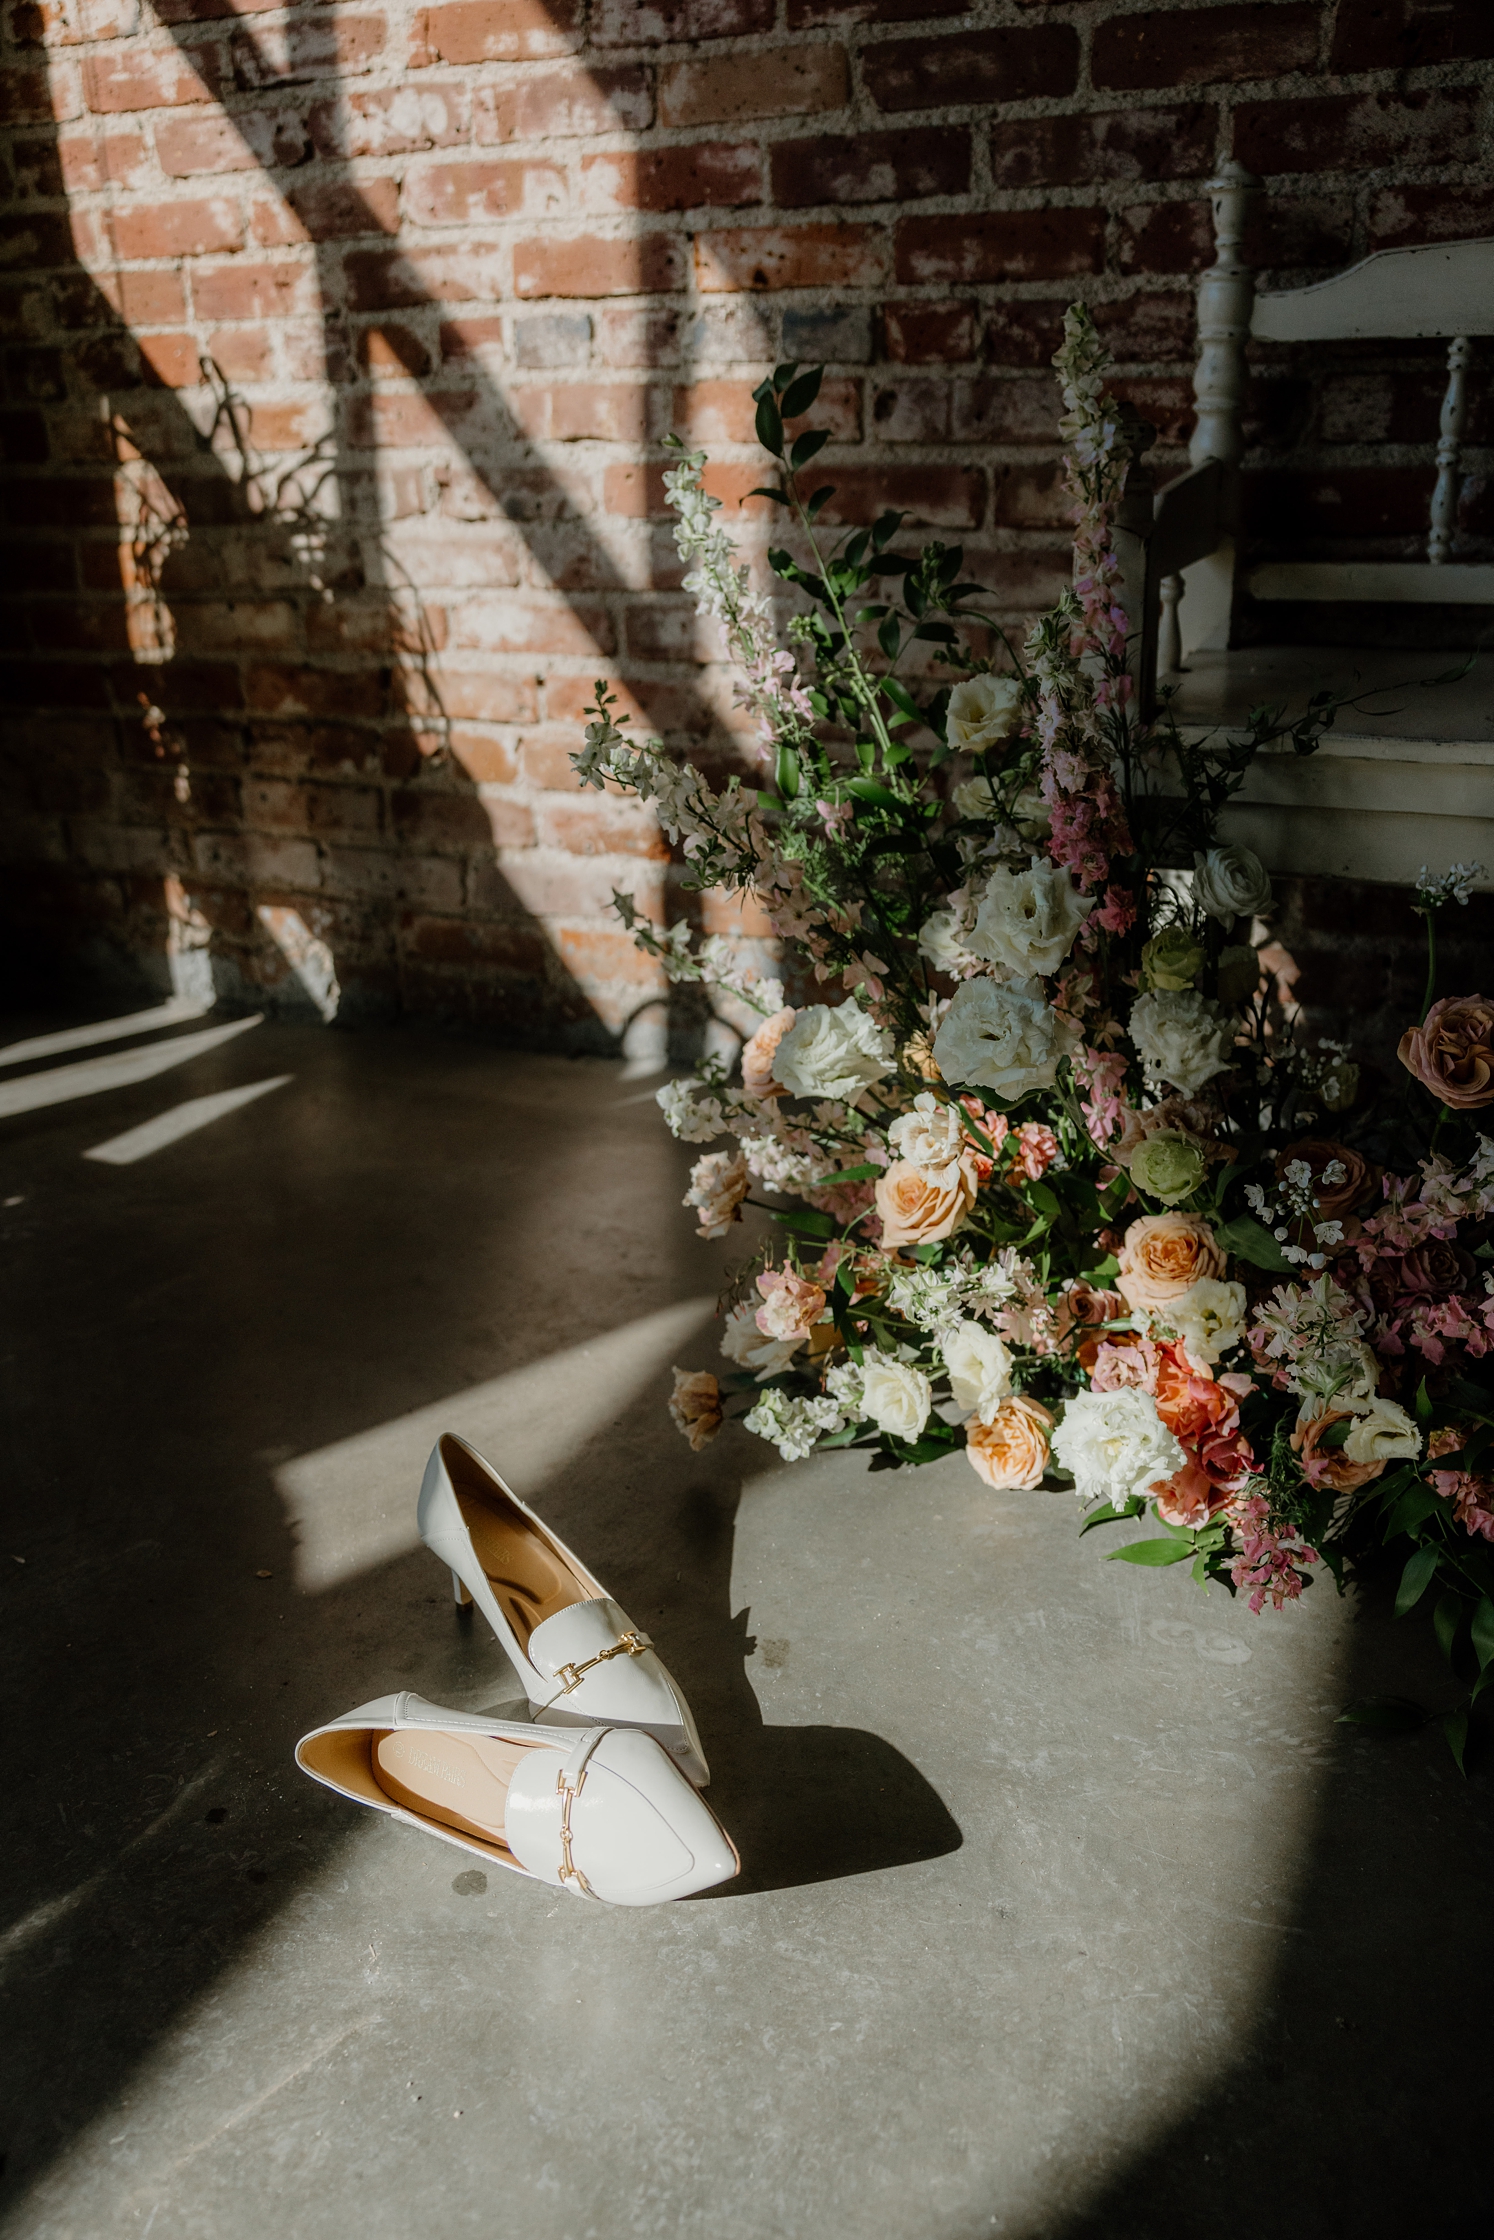 White wedding shoes next to pink and white floral arrangement | McArthur Weddings and Events